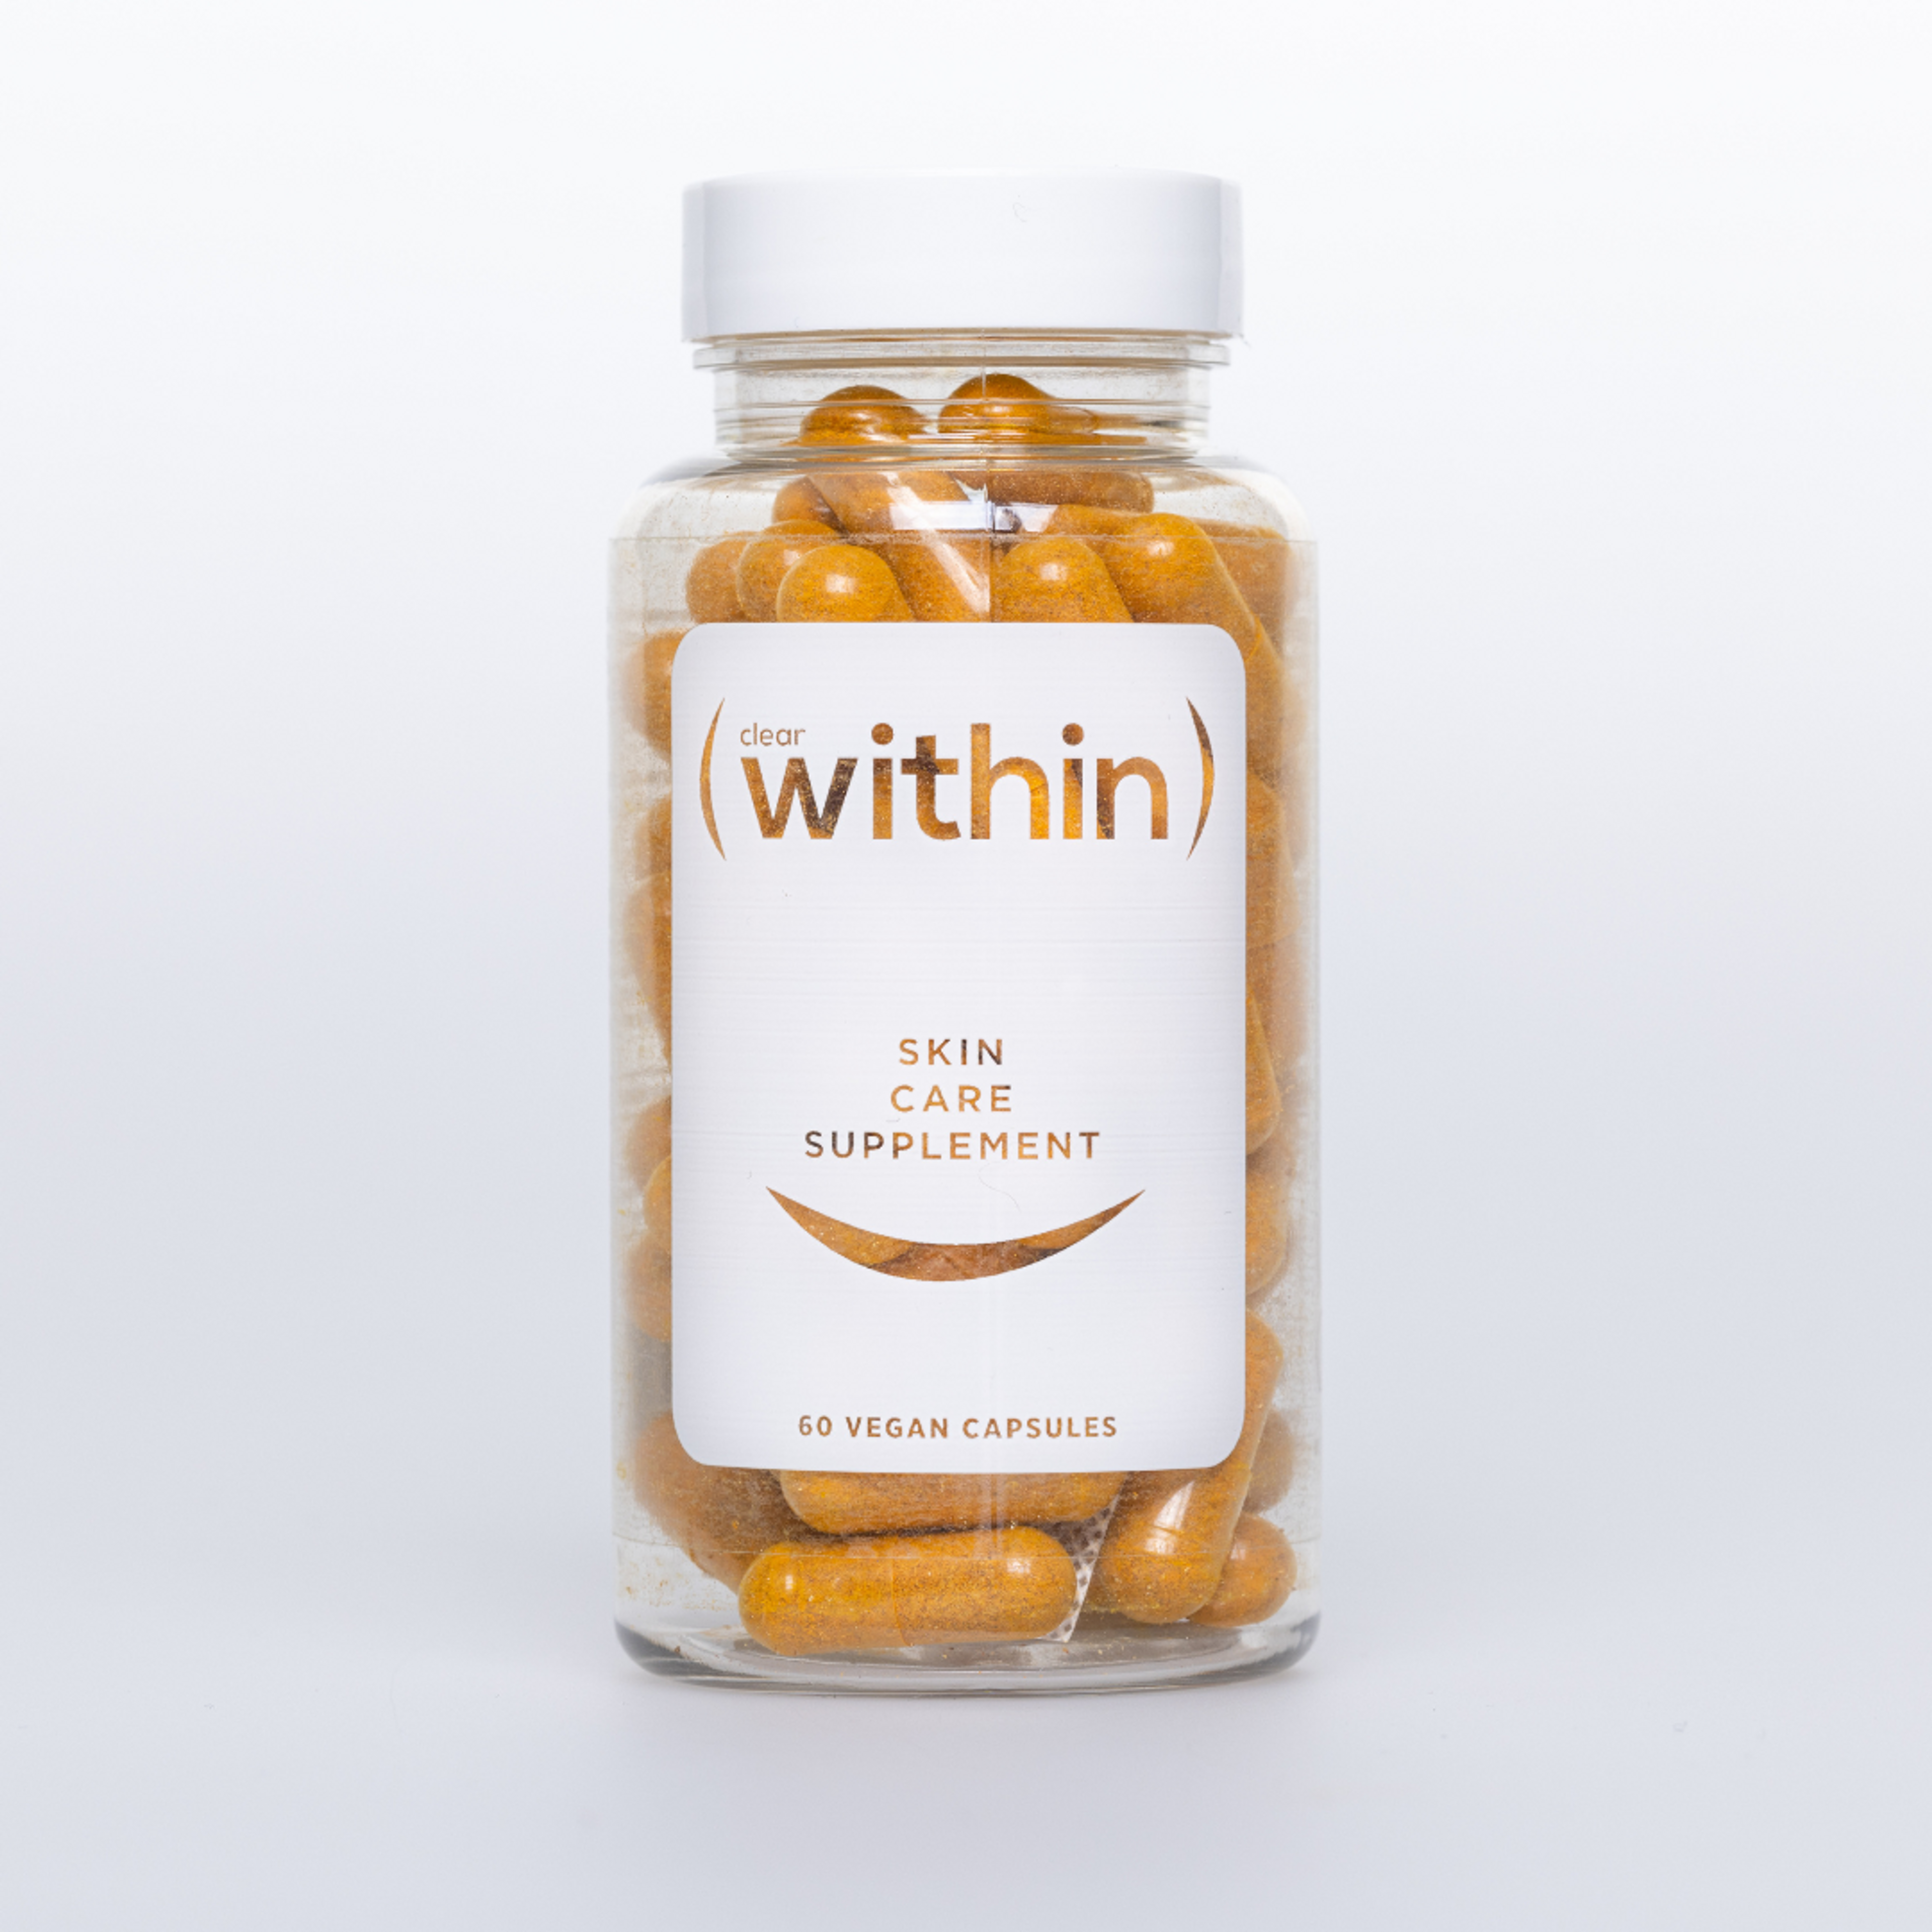 Clear Within Acne Vitamin & Supplement | Supports Clear Skin helping with Inflammation, Oiliness, and Hormonal Acne | 60 Capsules | 30 Day Supply